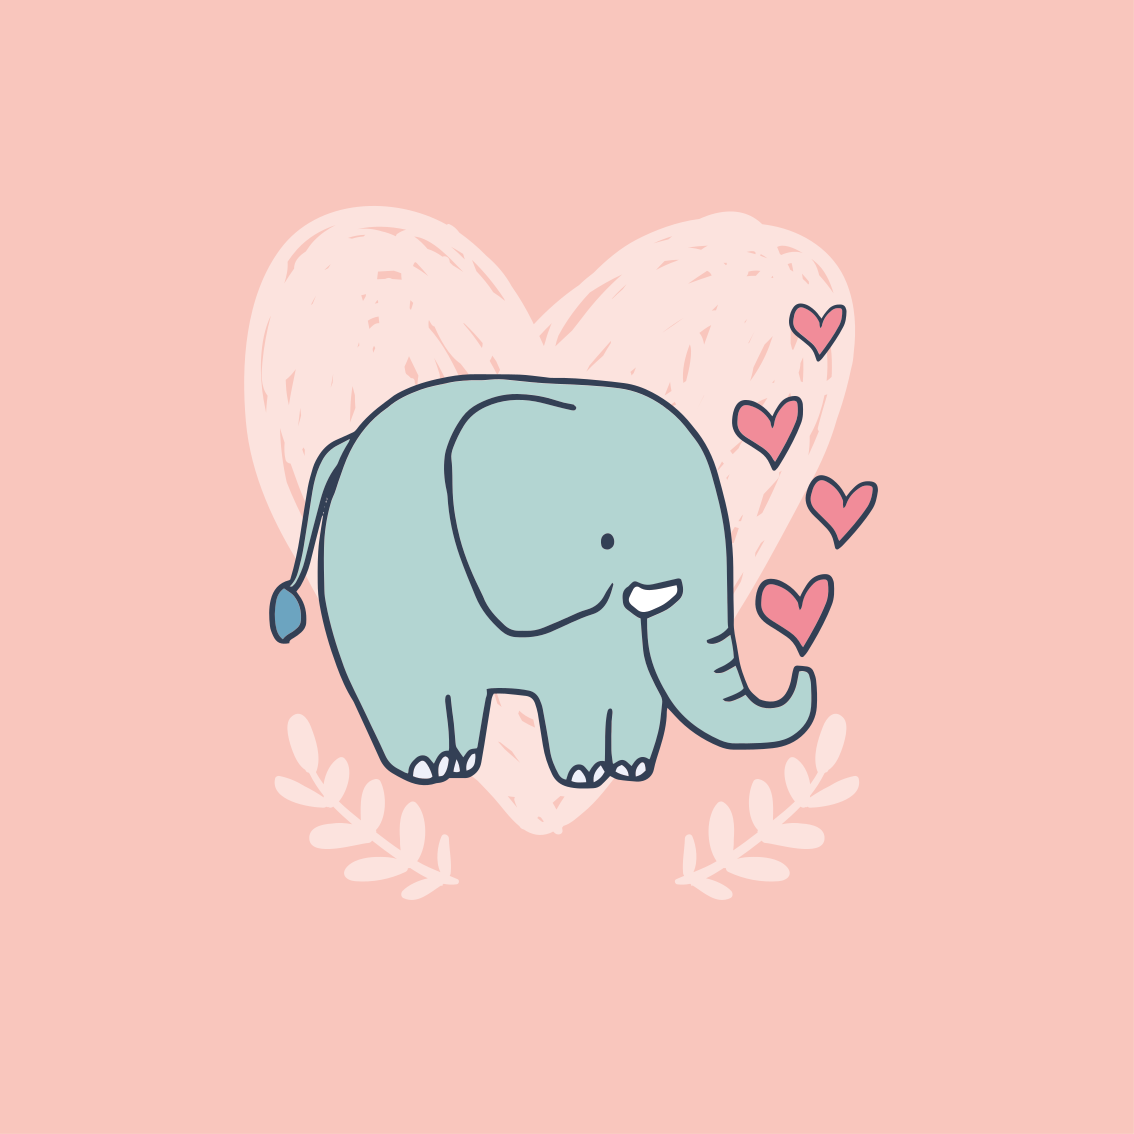 Cute elephant blowing hearts from snout wall pictures for nursery -  TenStickers